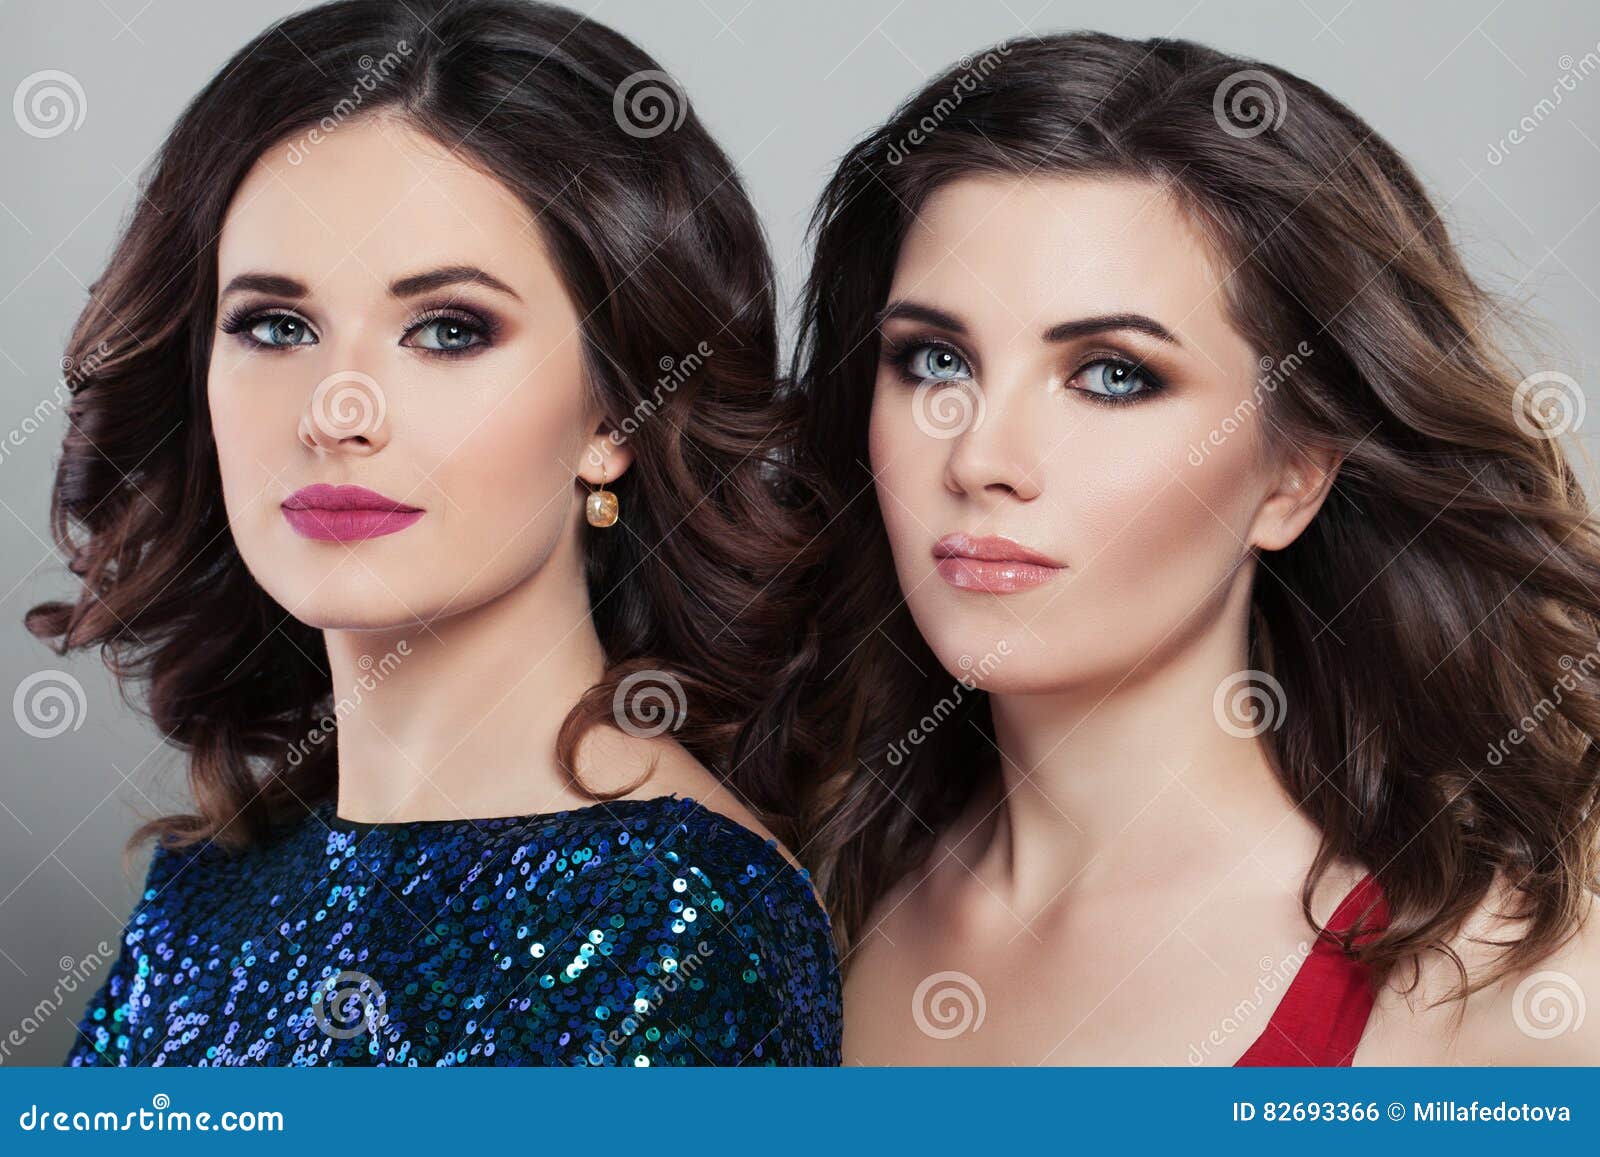 https://thumbs.dreamstime.com/z/two-glamorous-women-fashion-models-evening-hairstyle-makeup-make-up-82693366.jpg